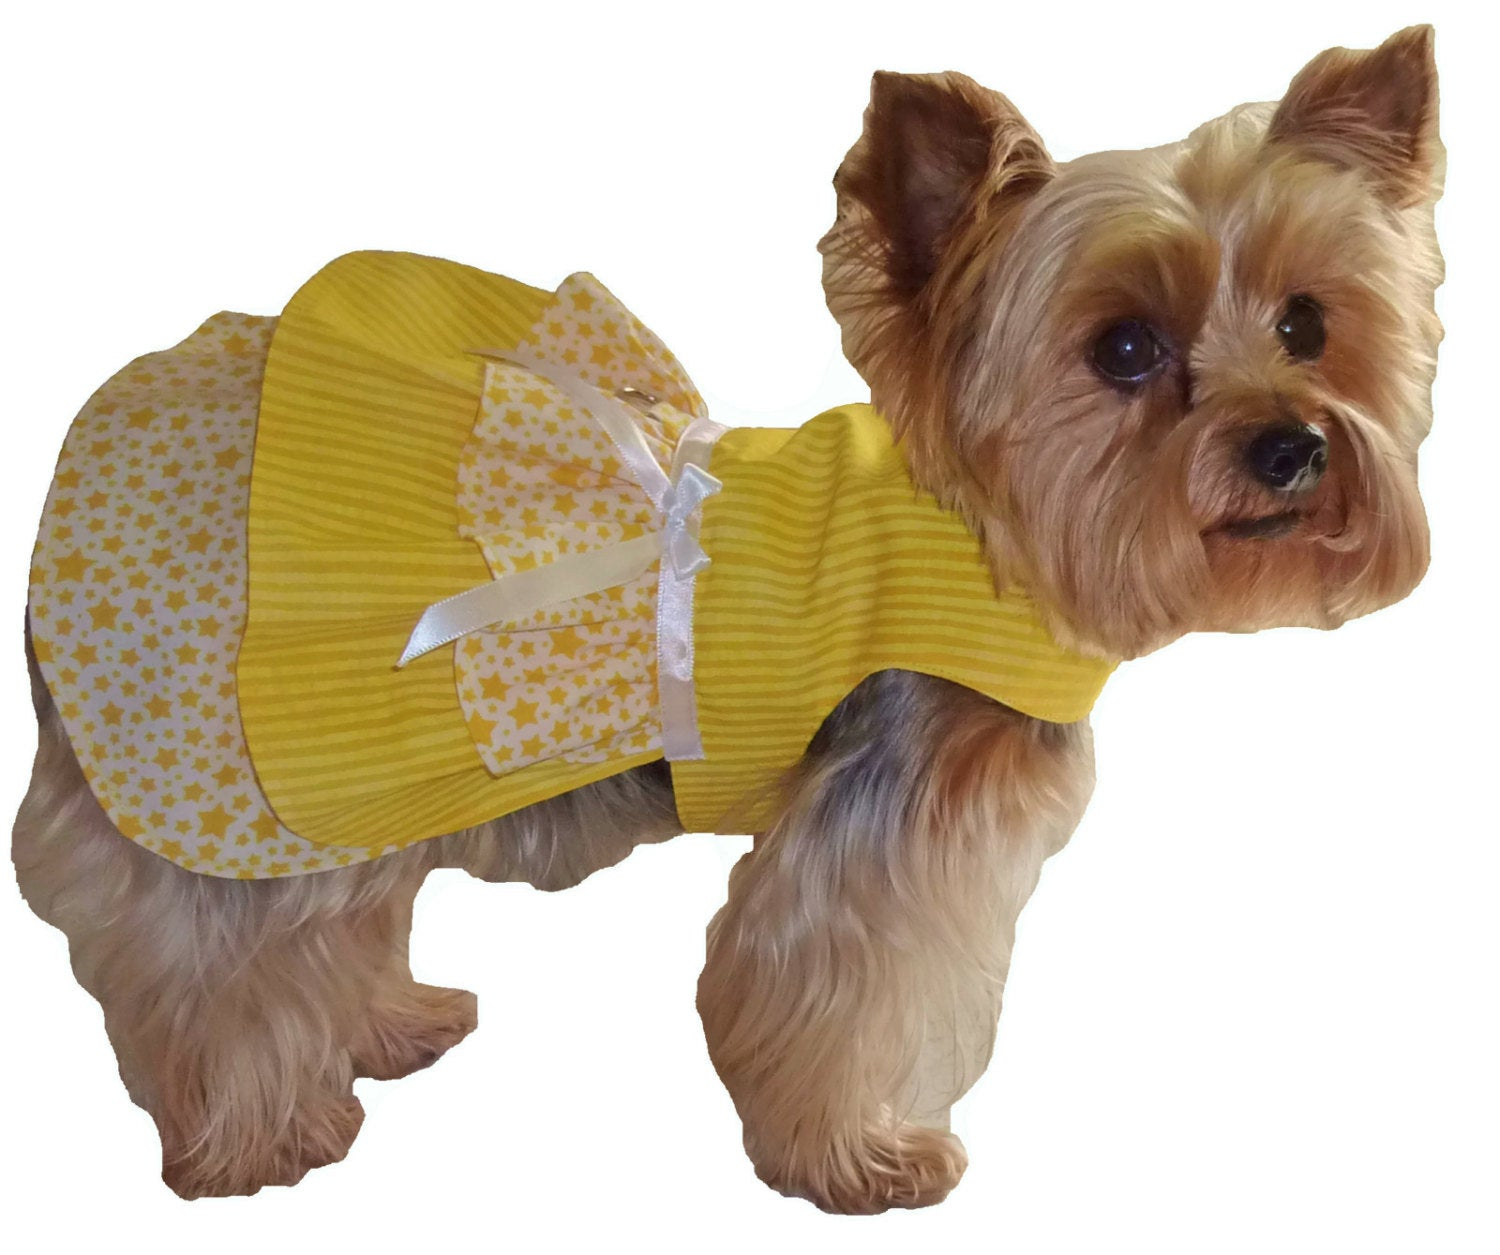 SALE 1628 Ruffle Dog Dress Pattern For The By SofiandFriends